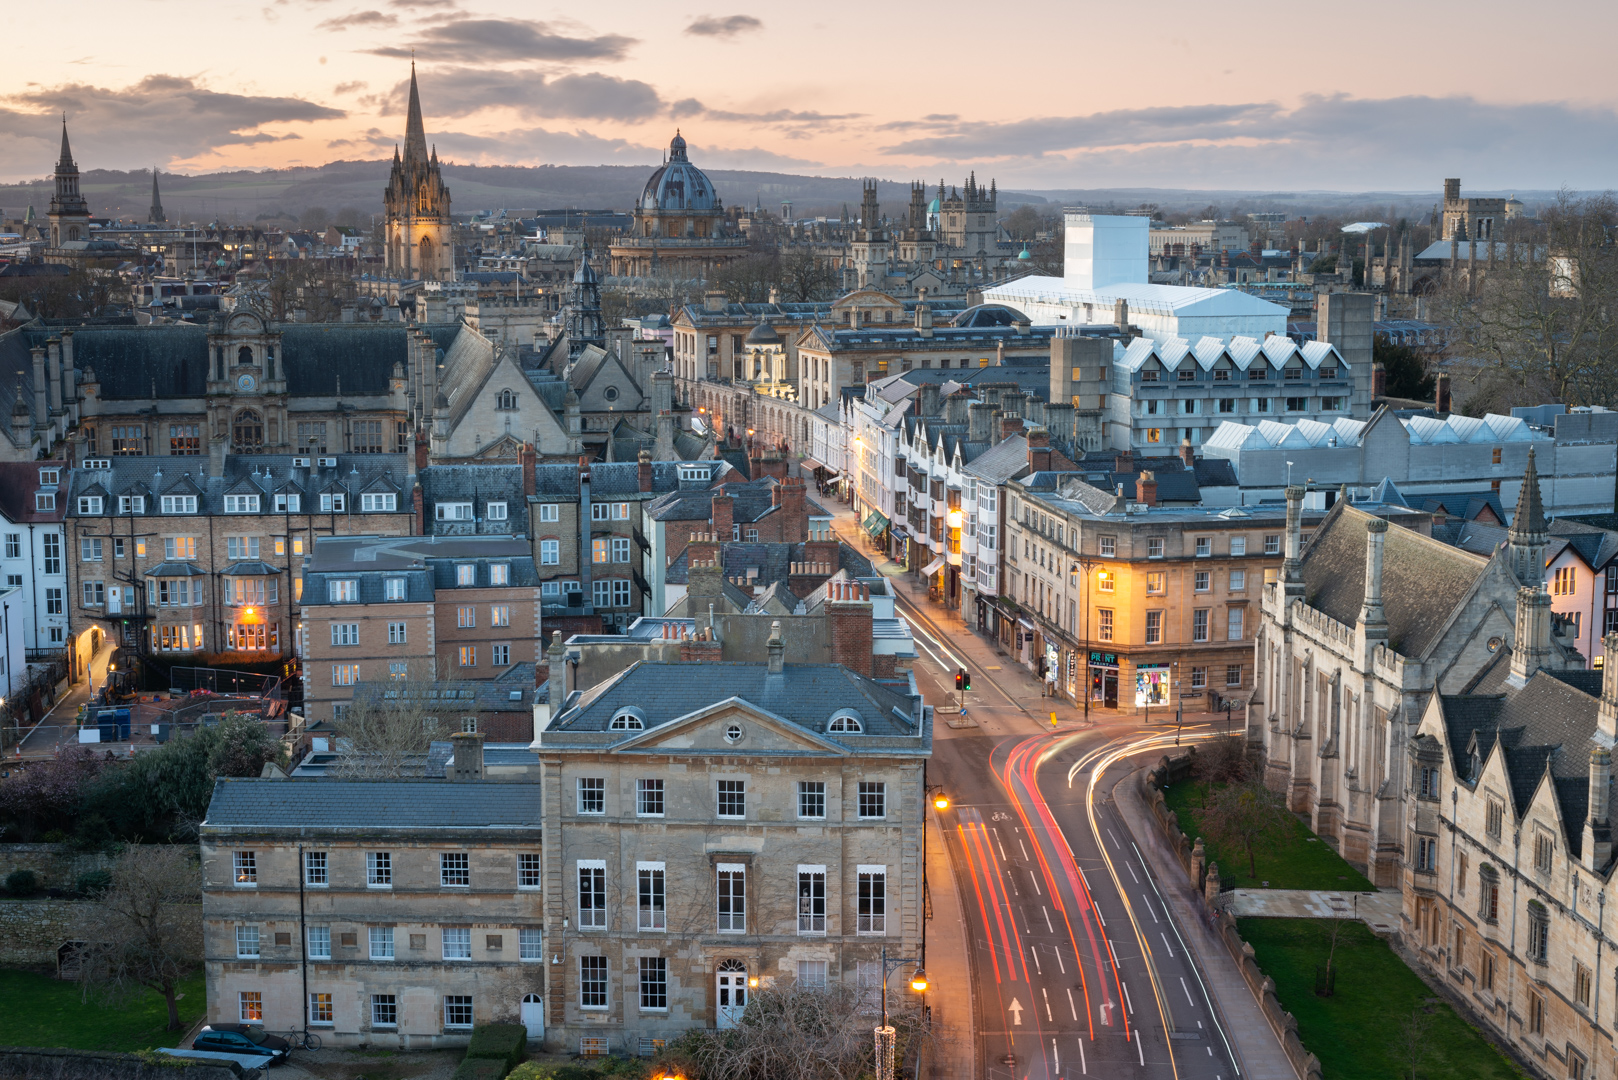 Oxford at twilight from Magdalen Tower